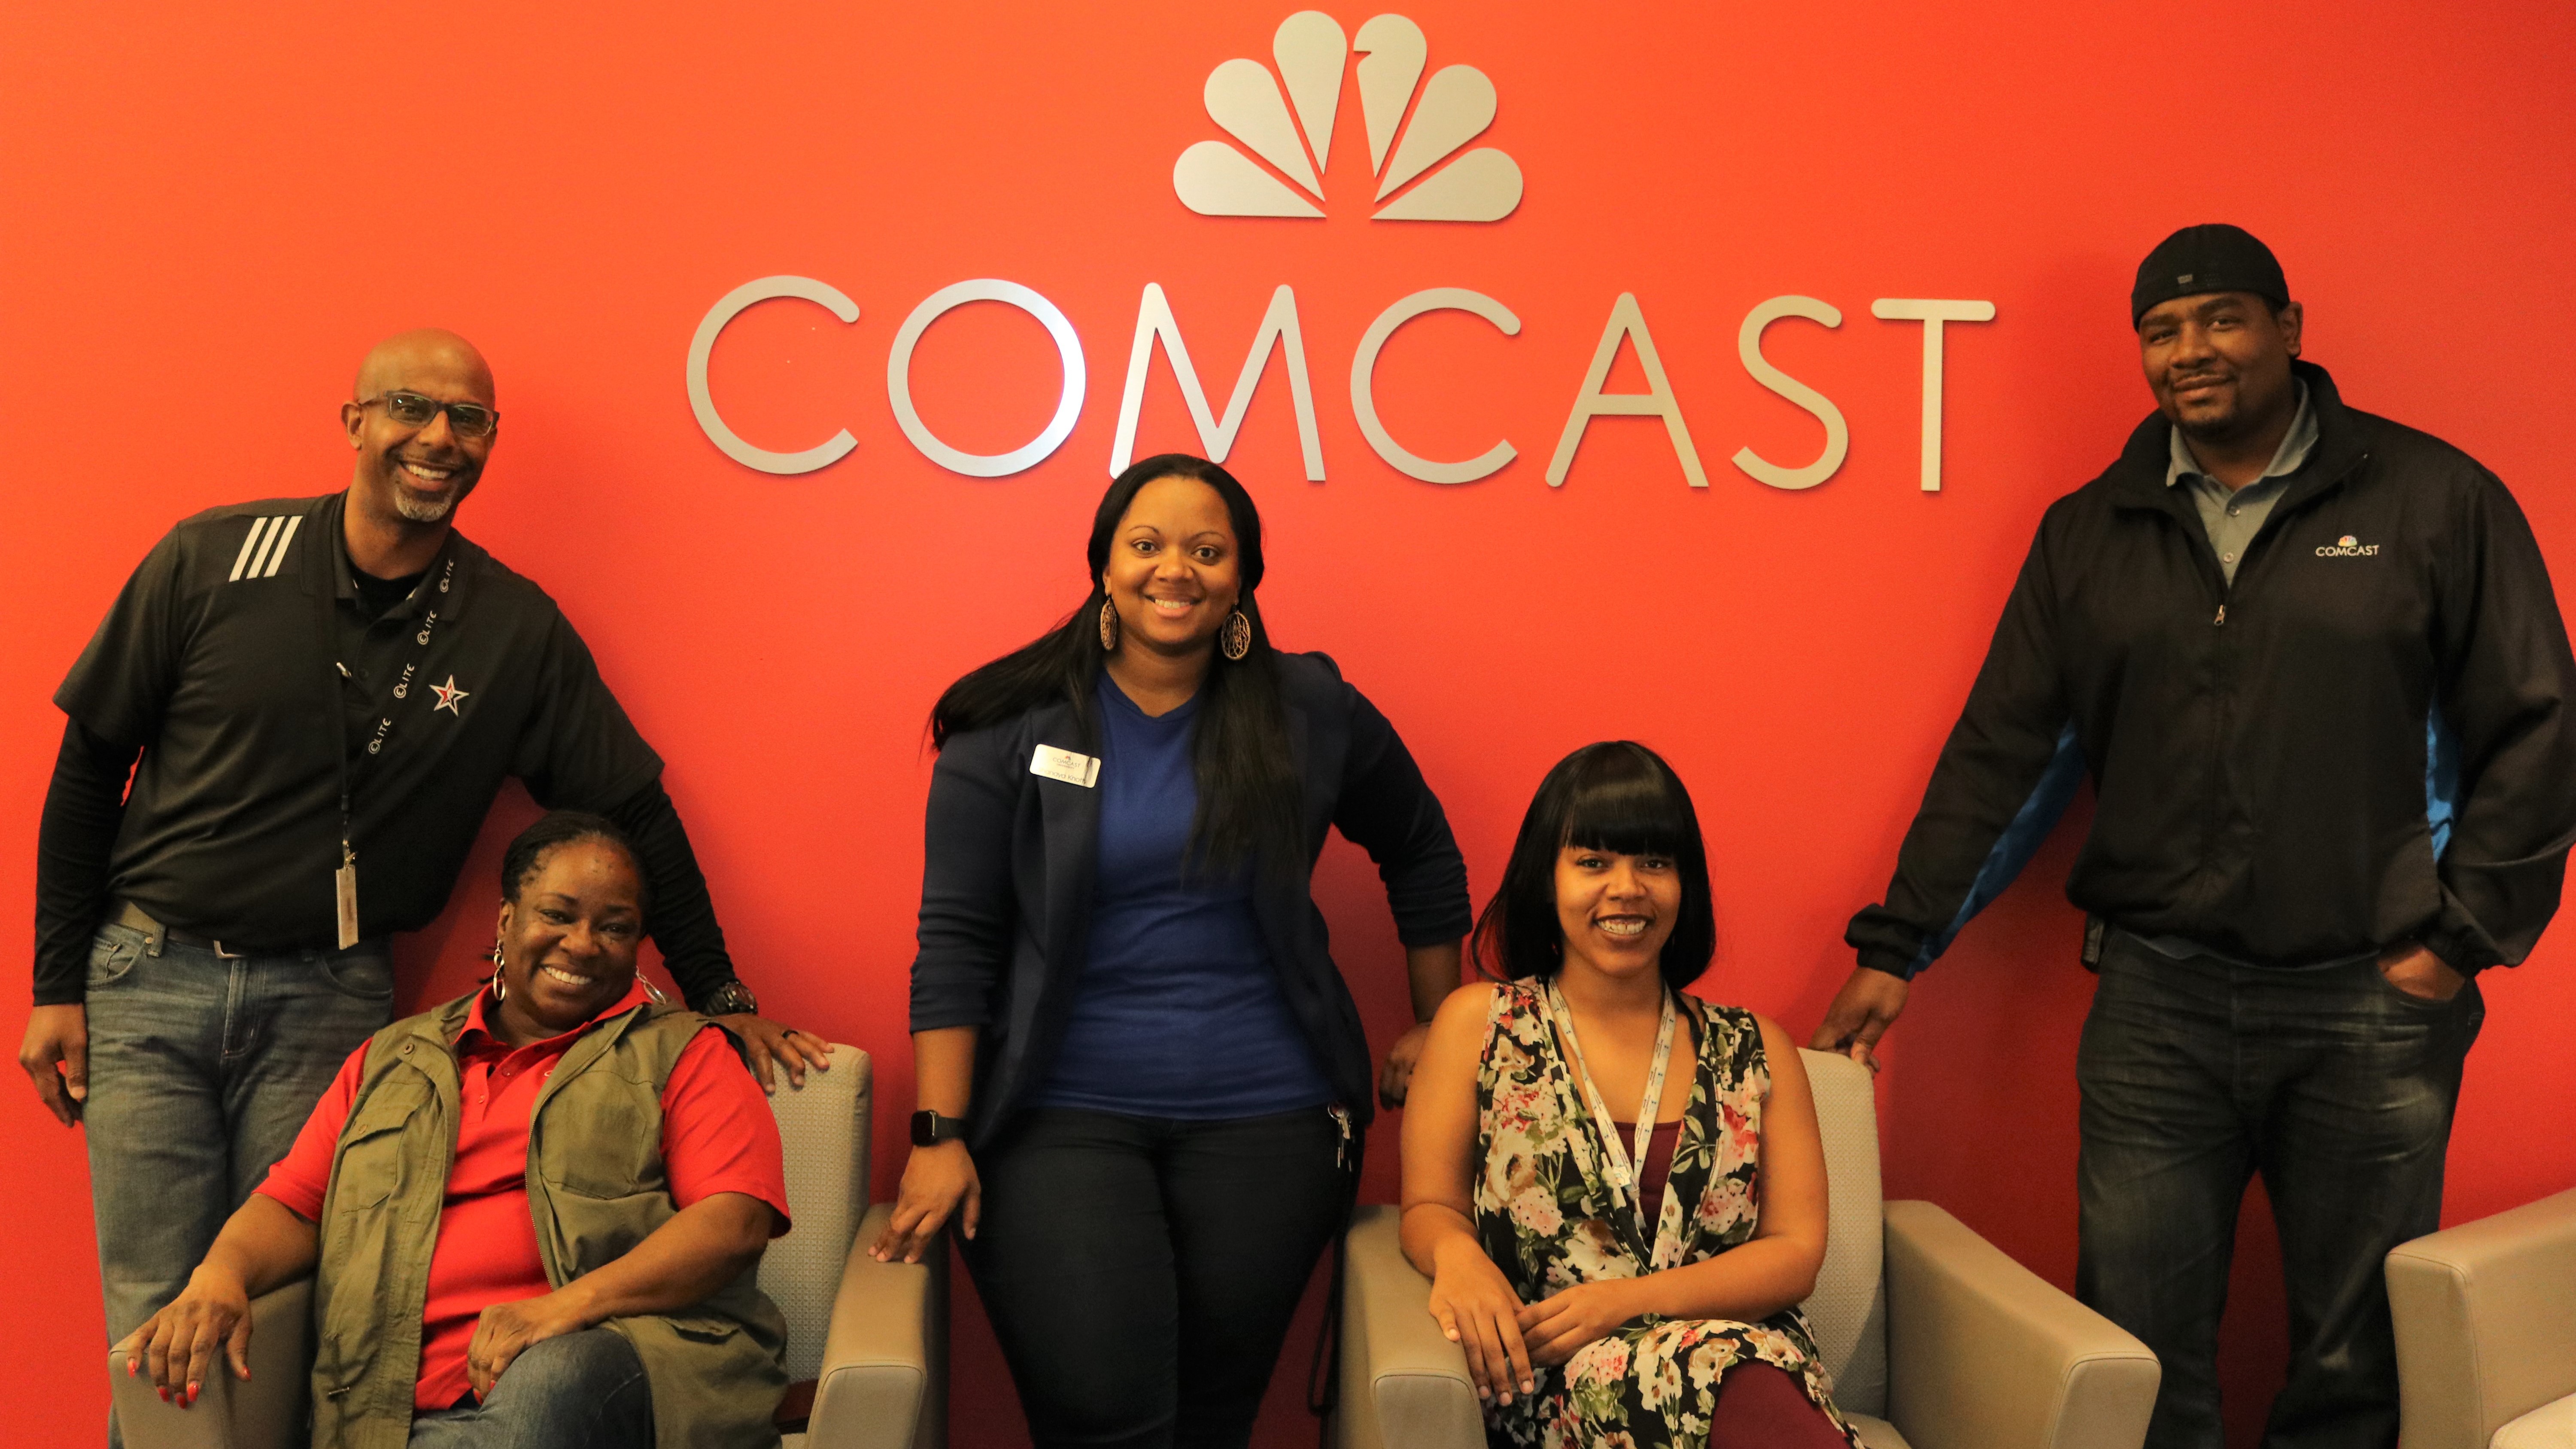 Members of Comcast’s Black Employee Network stand in front of a Comcast logo.